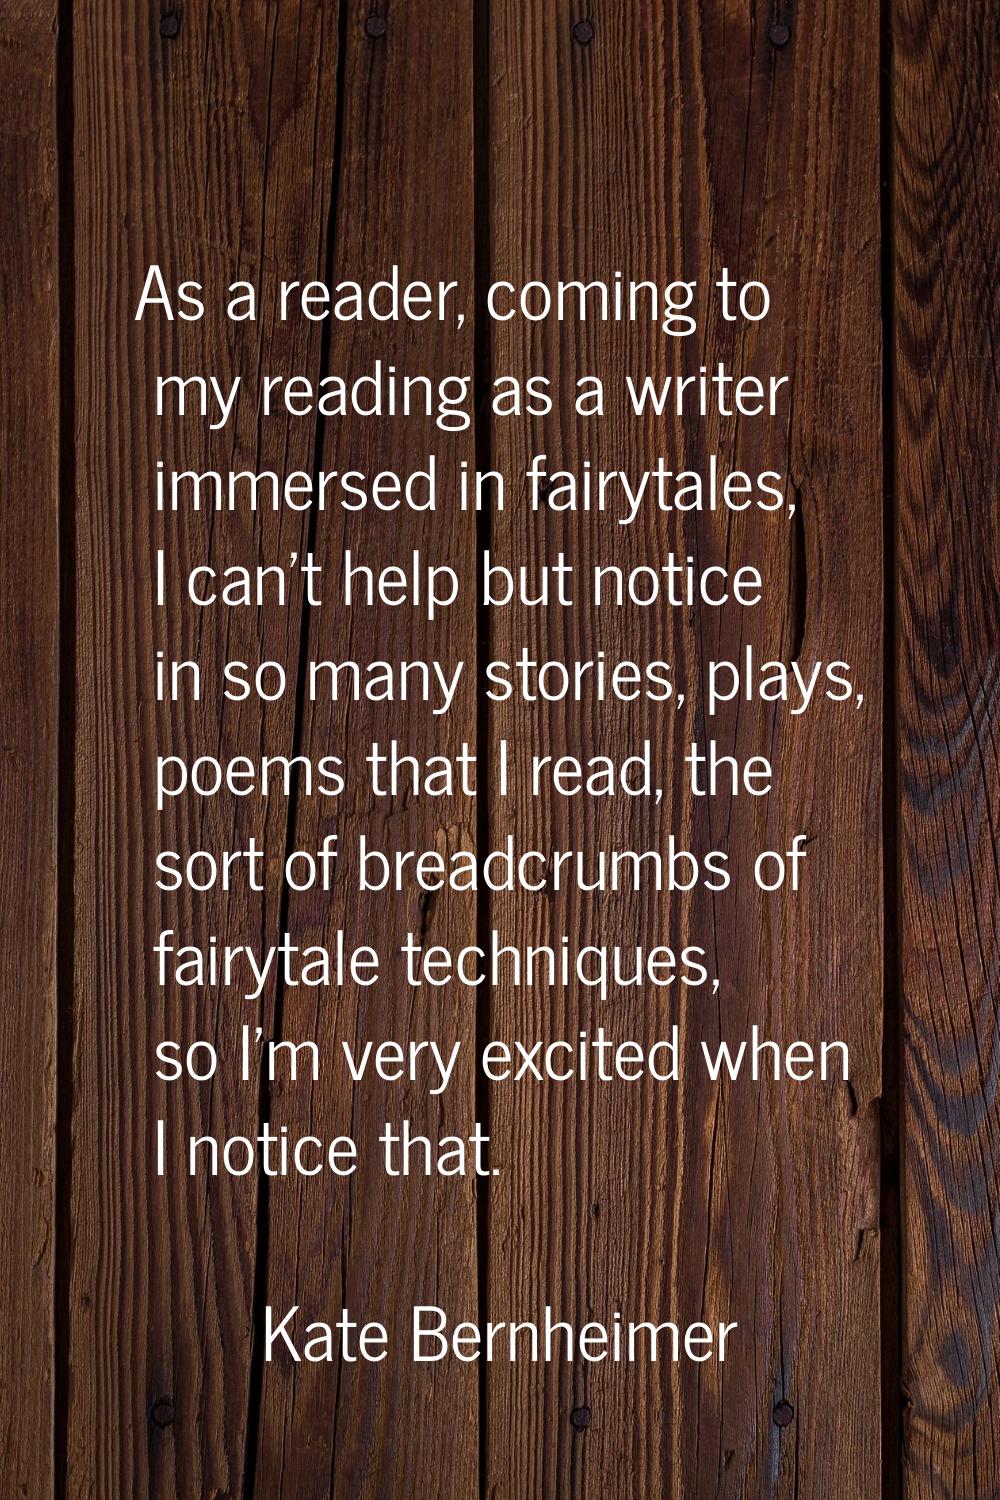 As a reader, coming to my reading as a writer immersed in fairytales, I can't help but notice in so